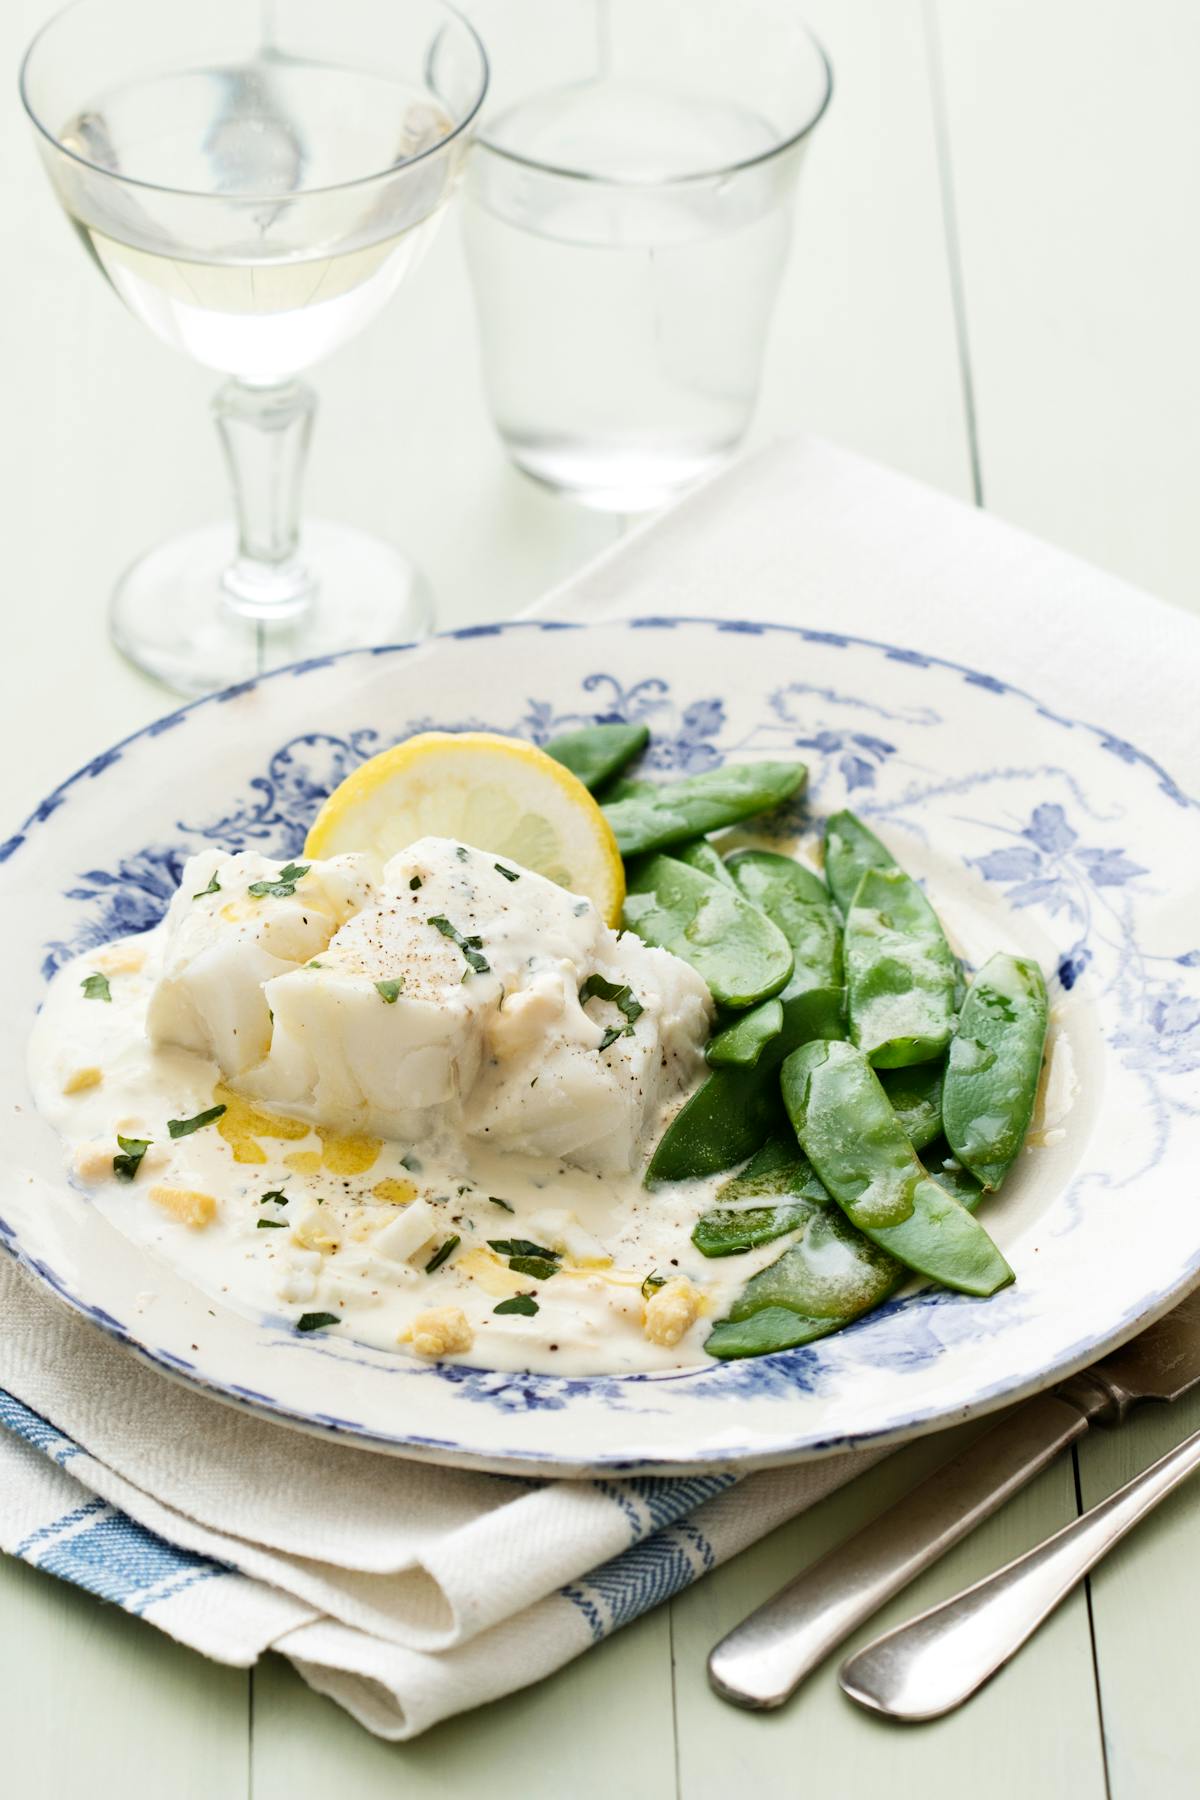 Fish with creamy egg sauce and sugar snaps